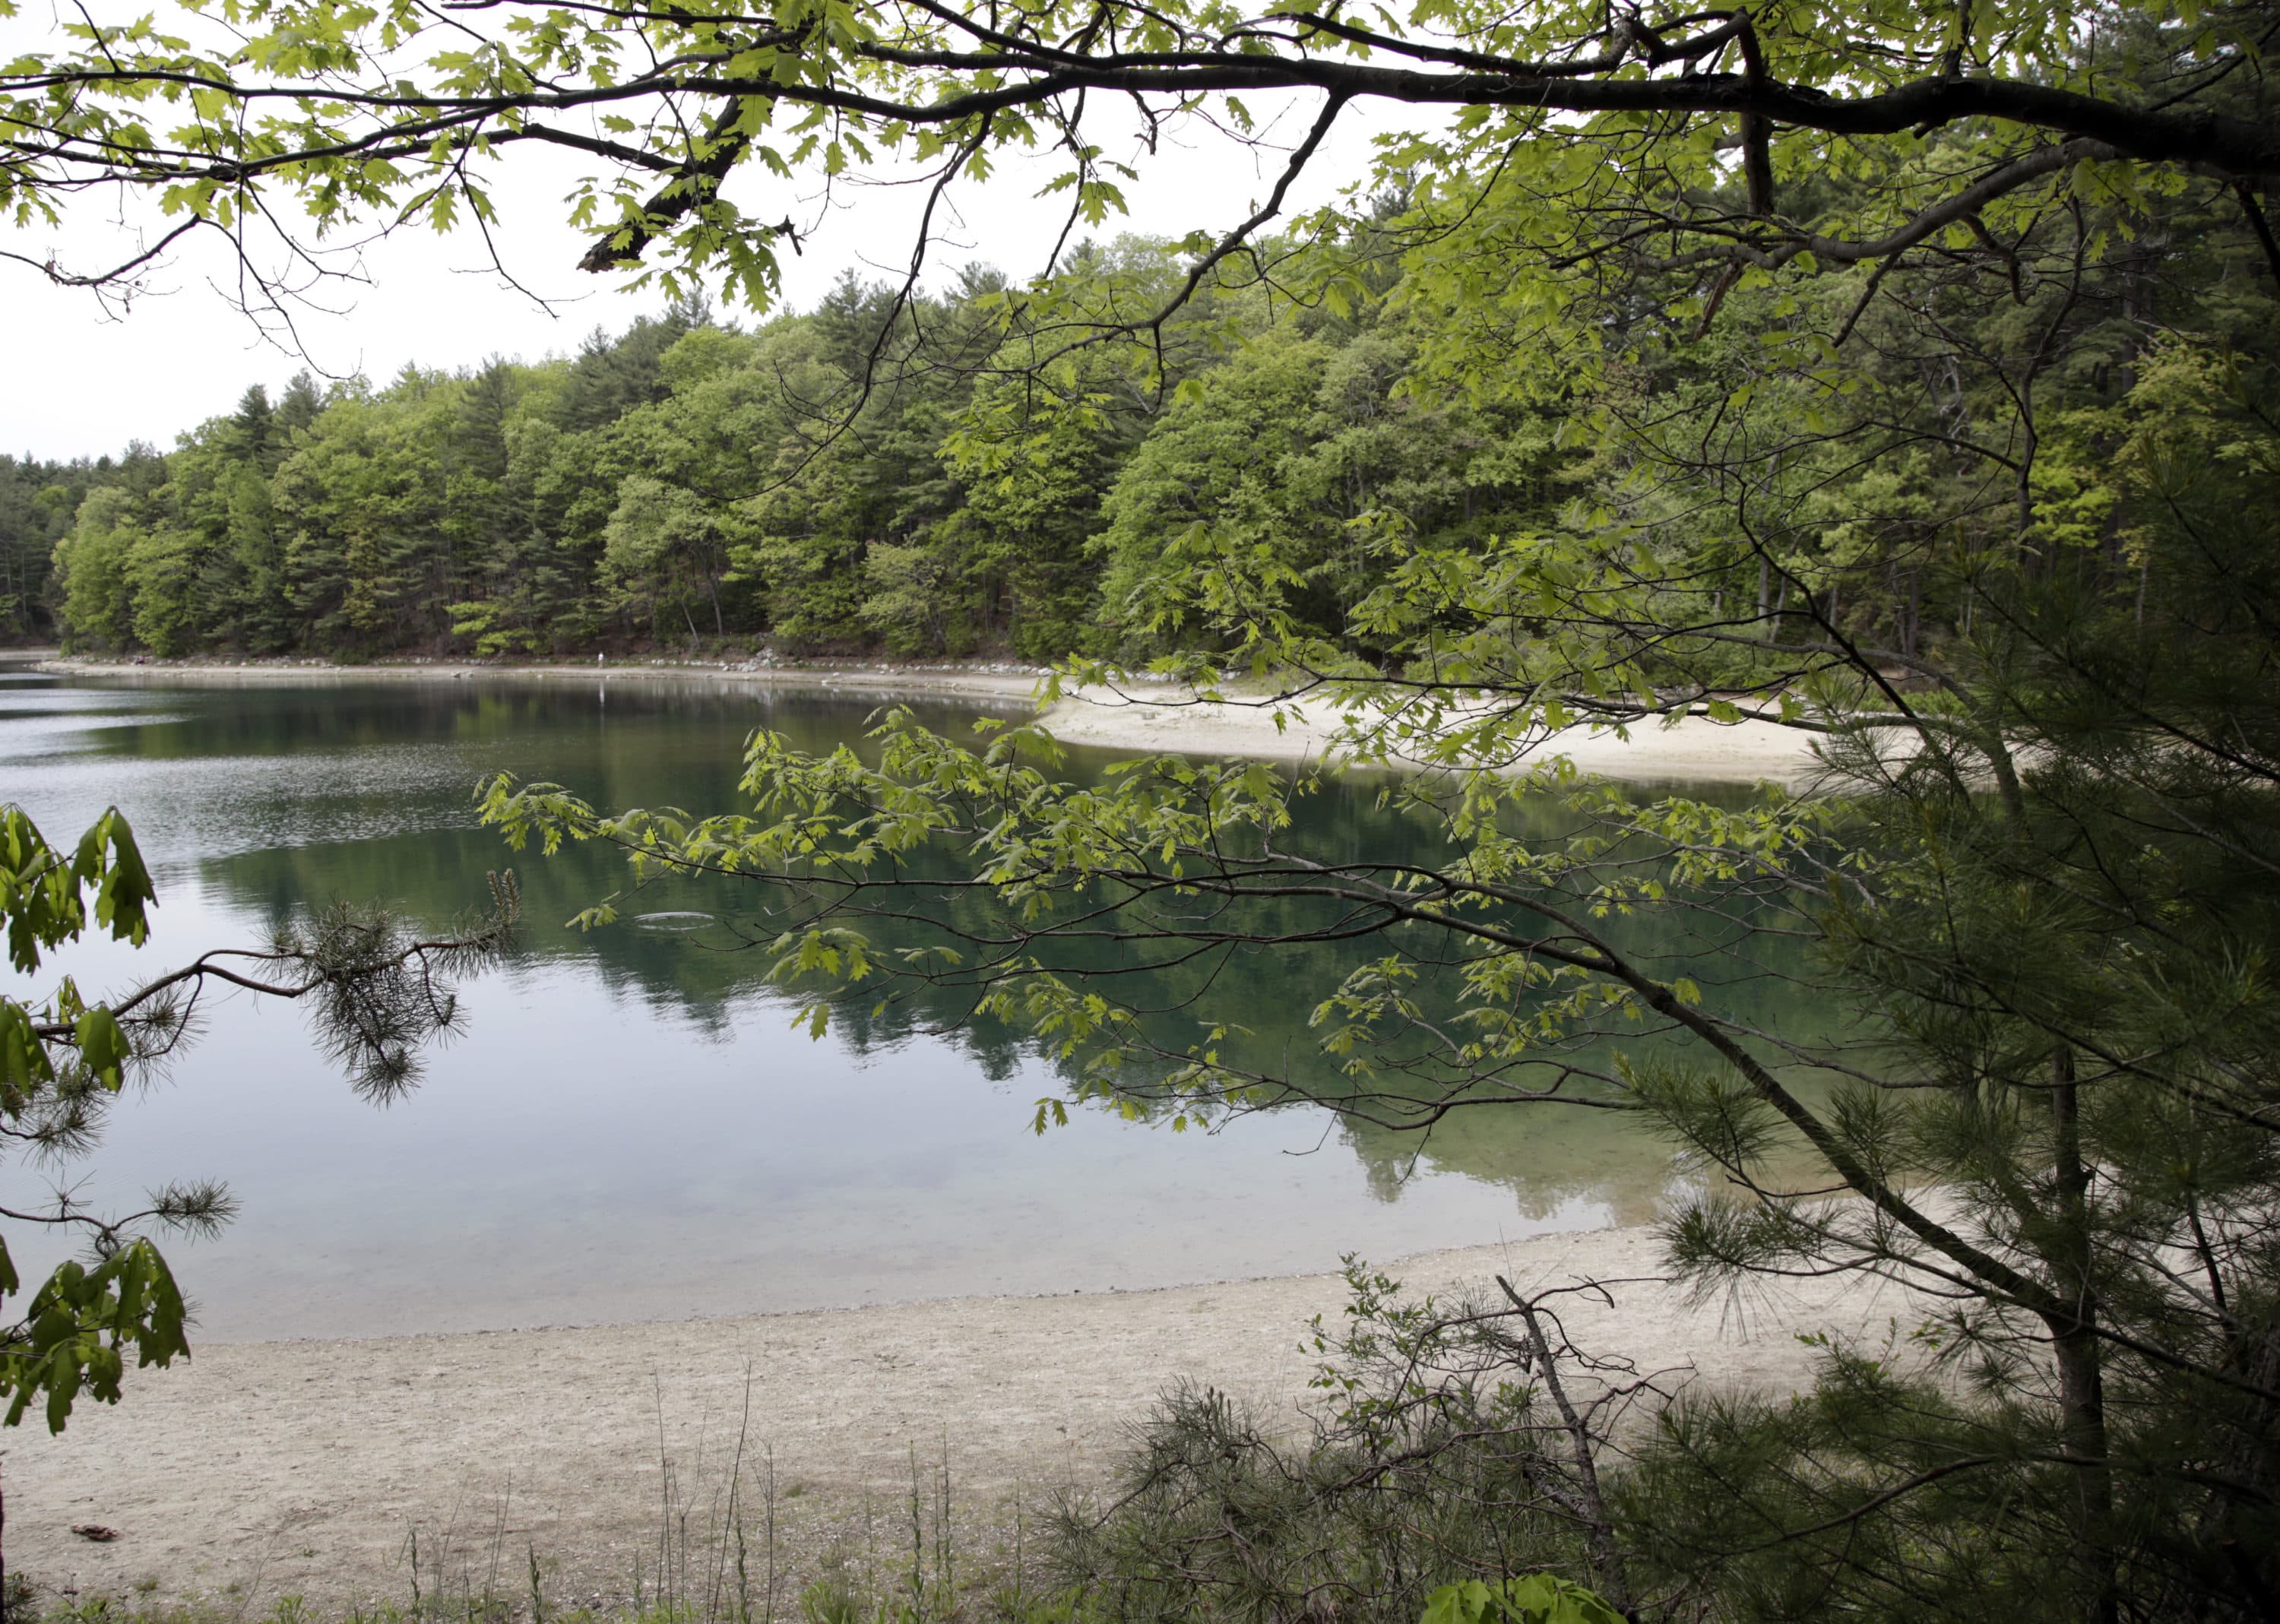 Walden Pond, pictured in 2017, in Concord, Mass., where 19th century American philosopher and naturalist Henry David Thoreau spent two years in solitude and reflection. (Elise Amendola/AP)